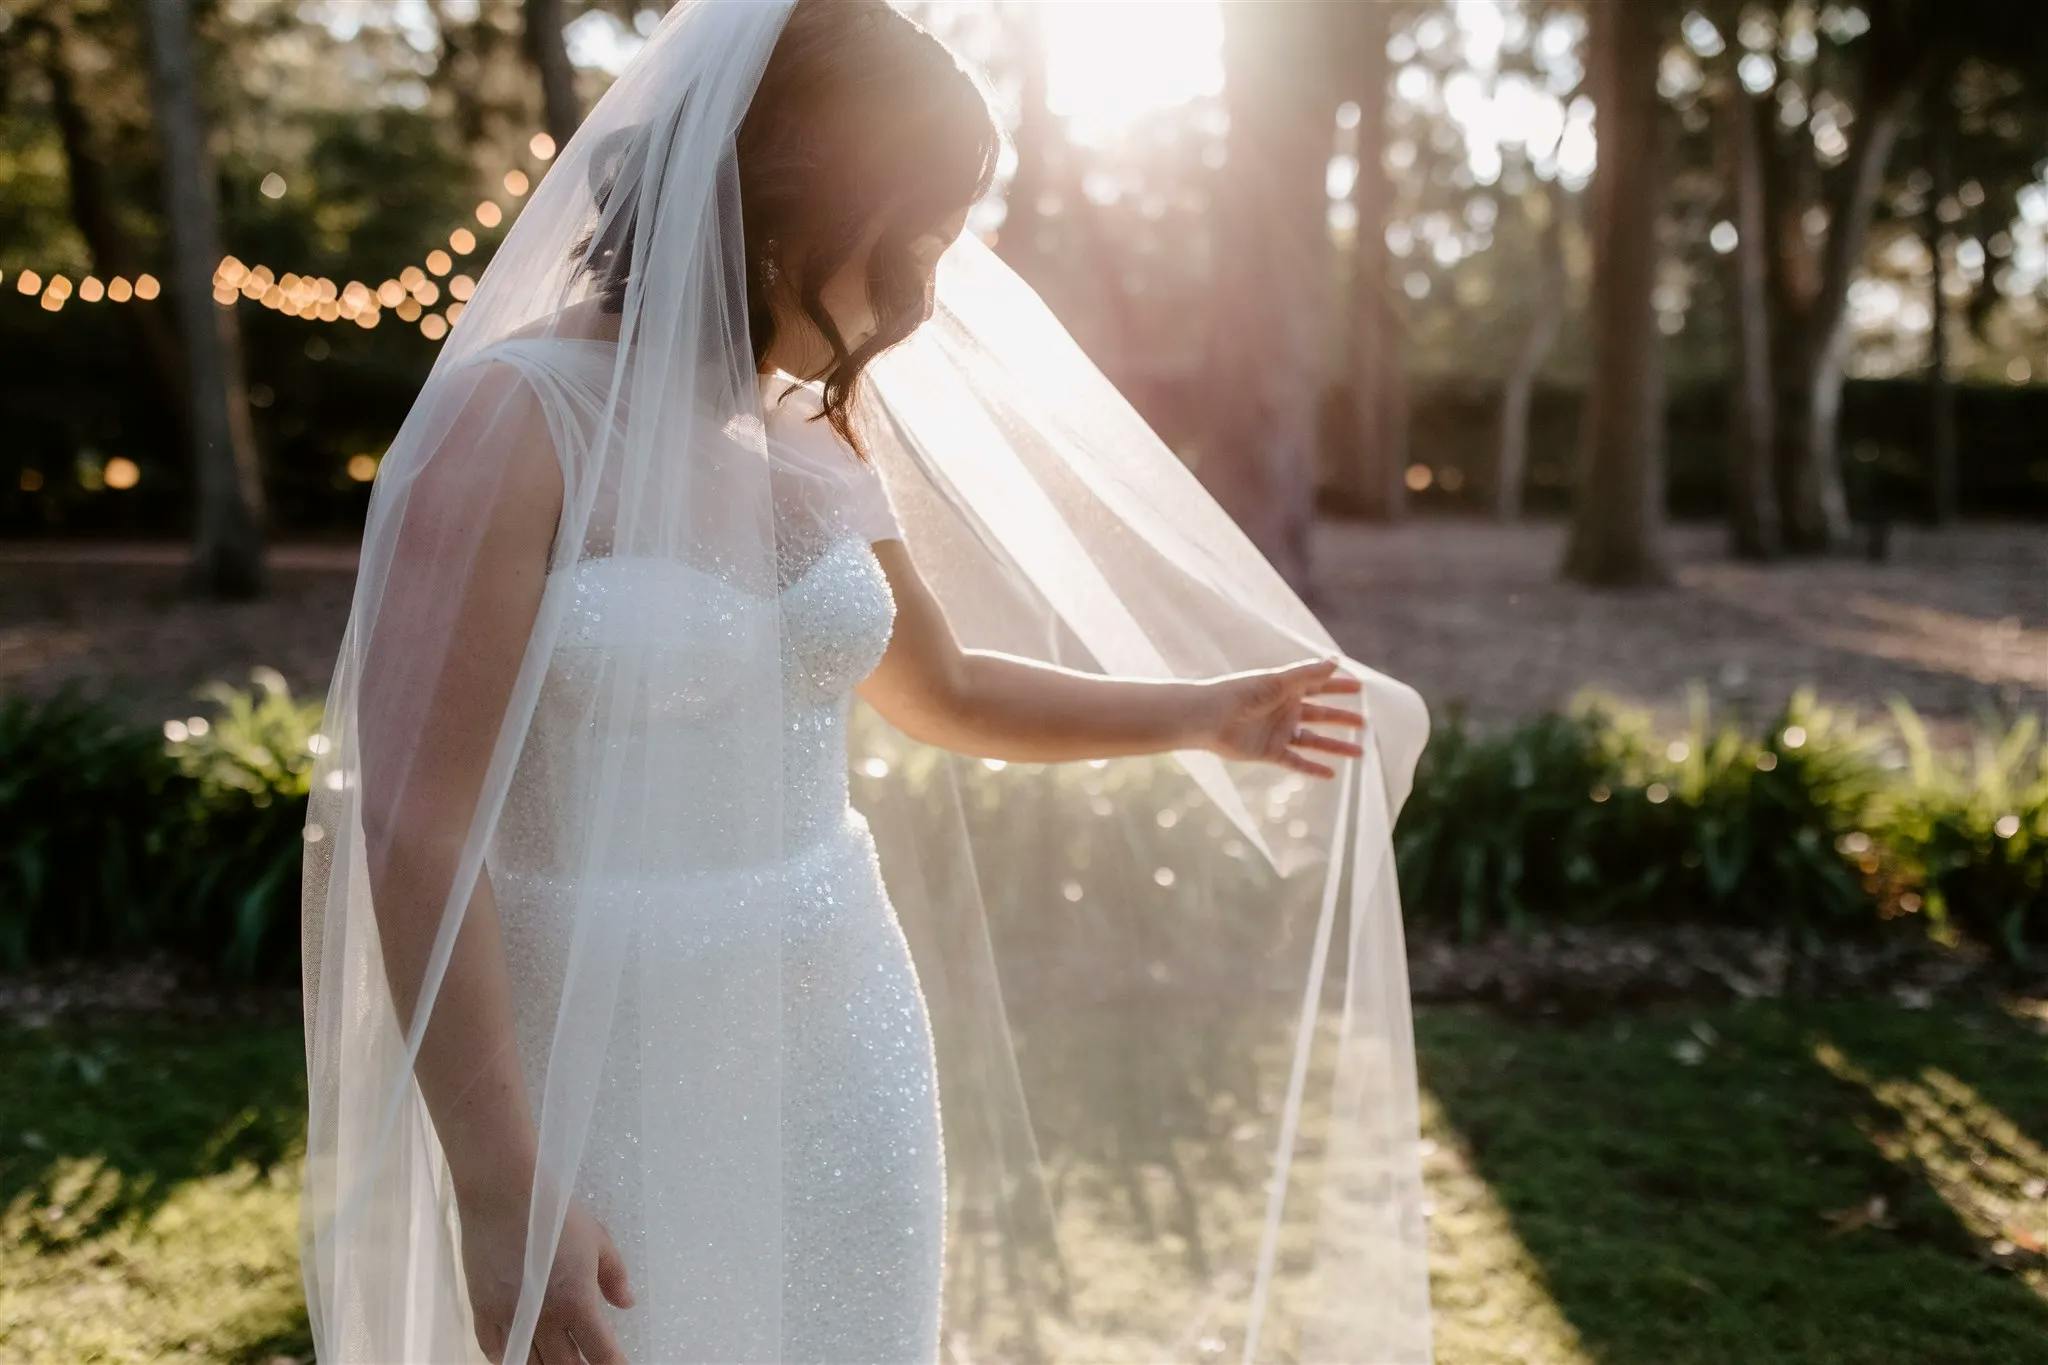 A bride in a sparkly white wedding dress stands in an outdoor setting with sunlight streaming through the trees. She is holding her sheer veil with one hand, and the background features string lights, greenery, and soft natural light.